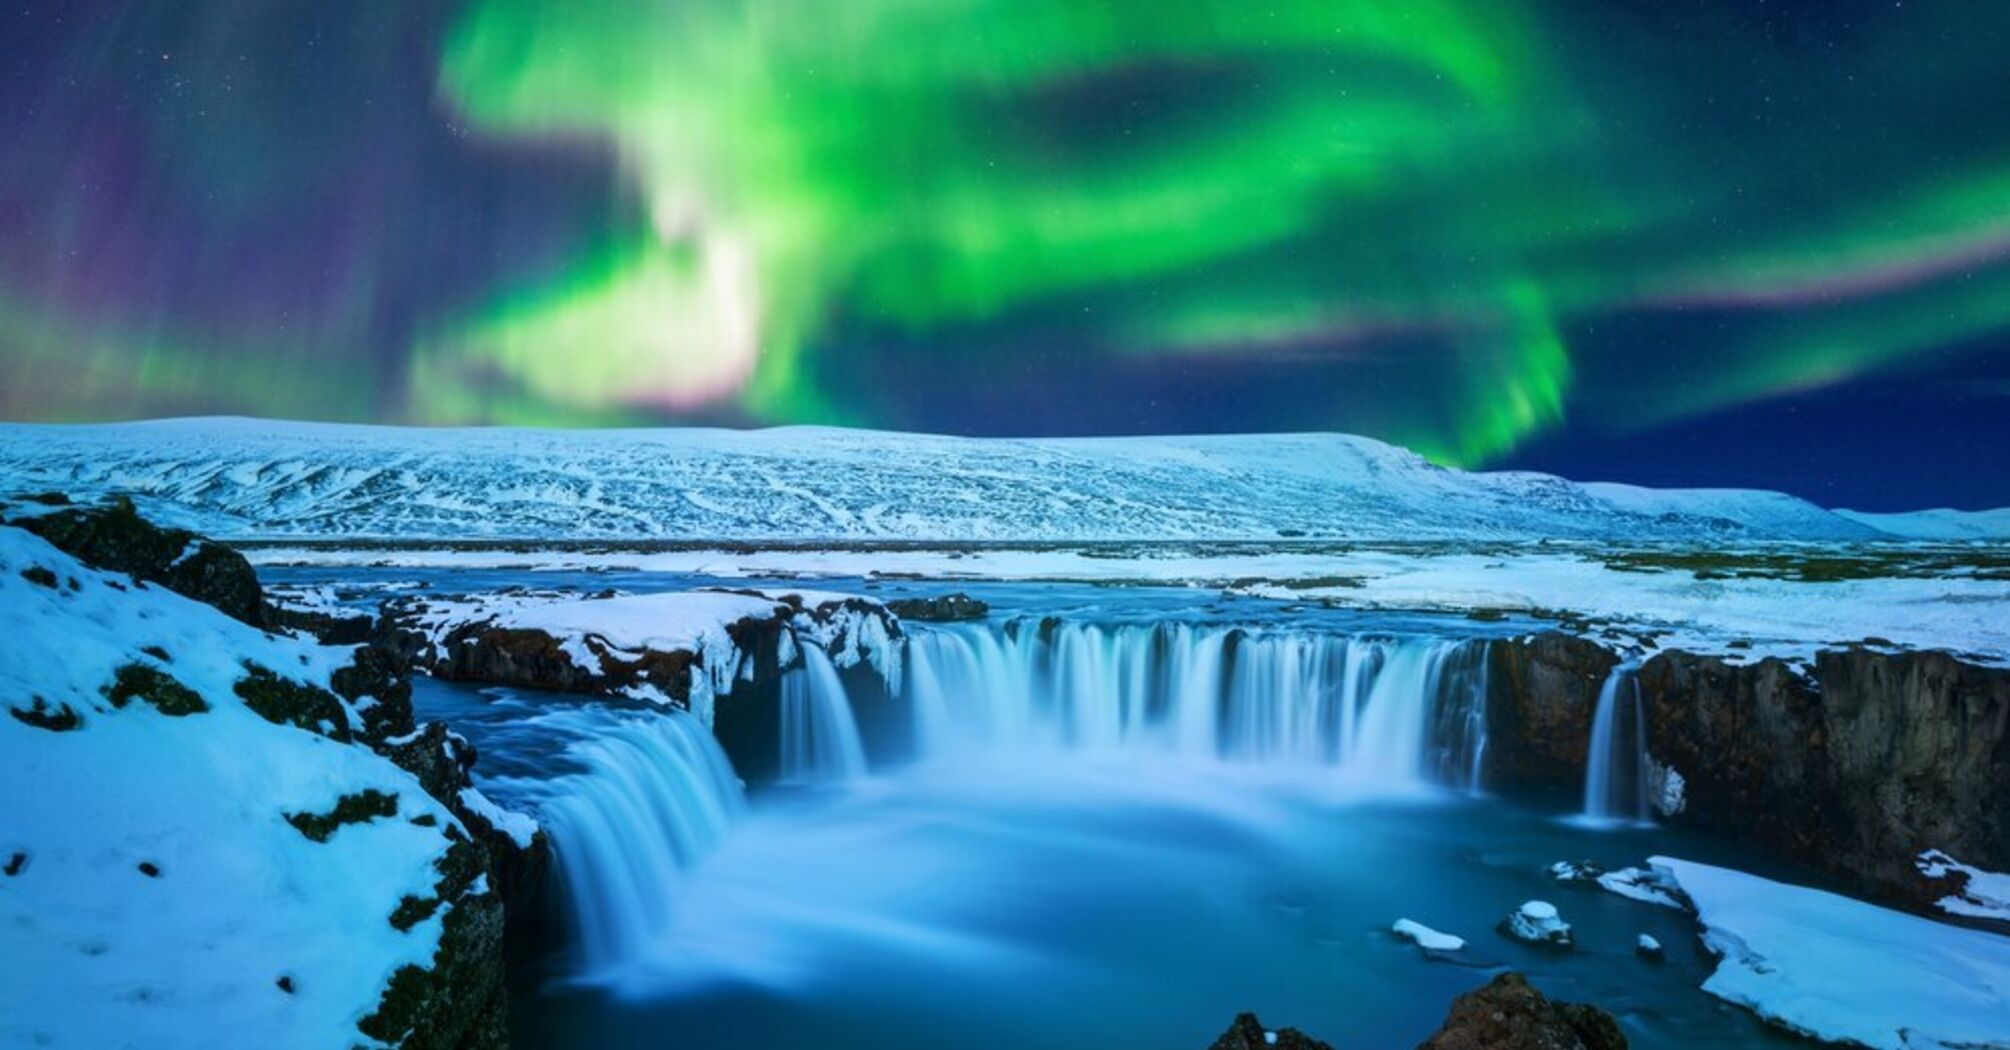 The most popular destinations to see the Northern Lights this year